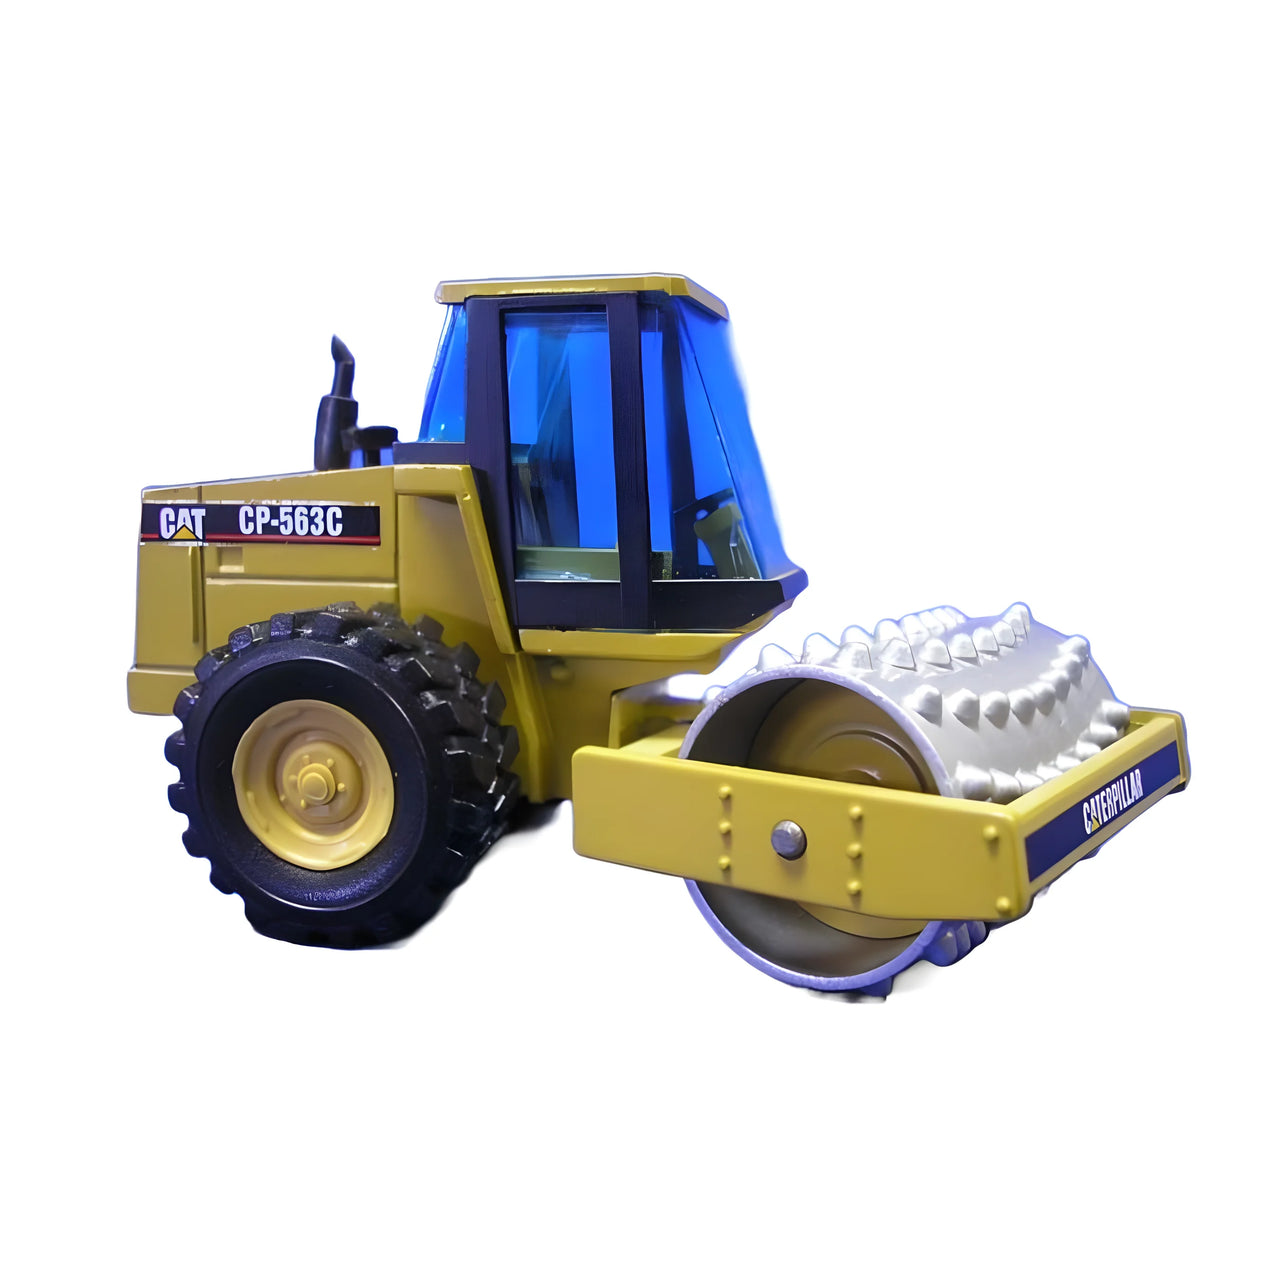 401.3 Caterpillar CP-563C Road Roller 1:50 Scale (Discontinued Model)